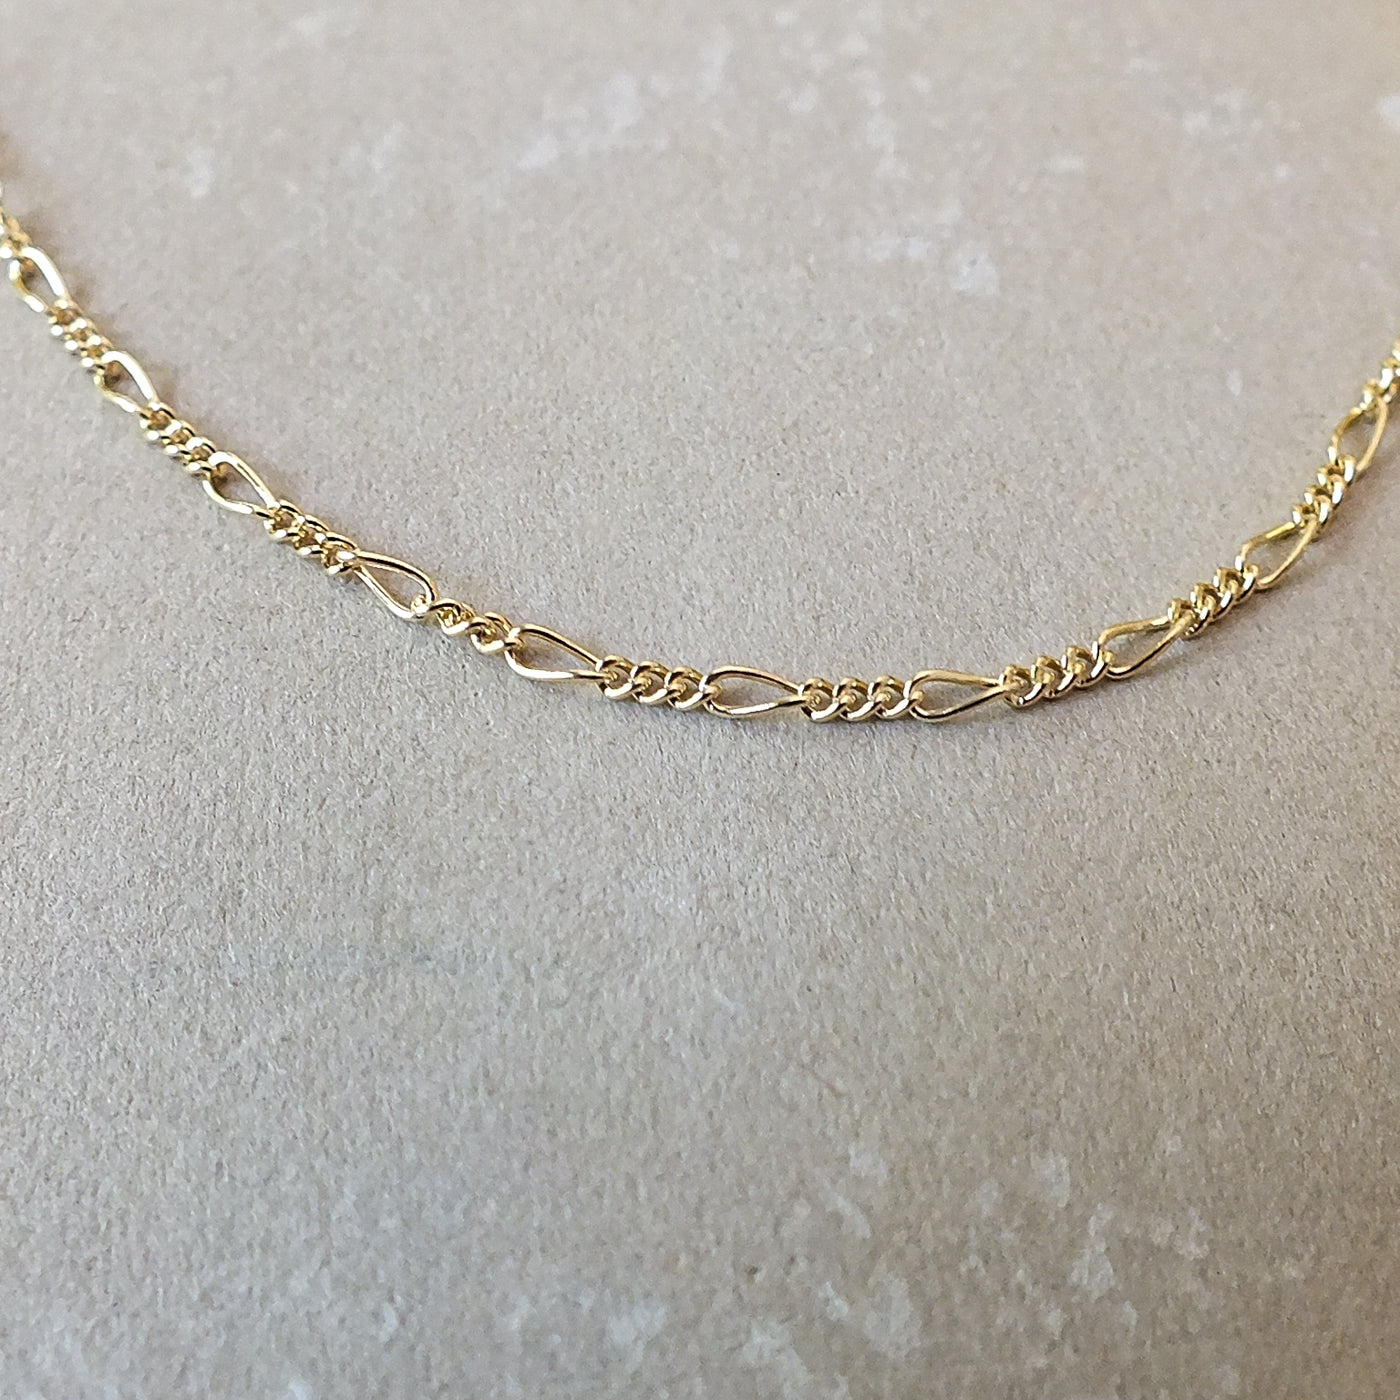 A gold-filled Becoming Jewelry Figaro Chain Necklace laid straight on a textured surface.